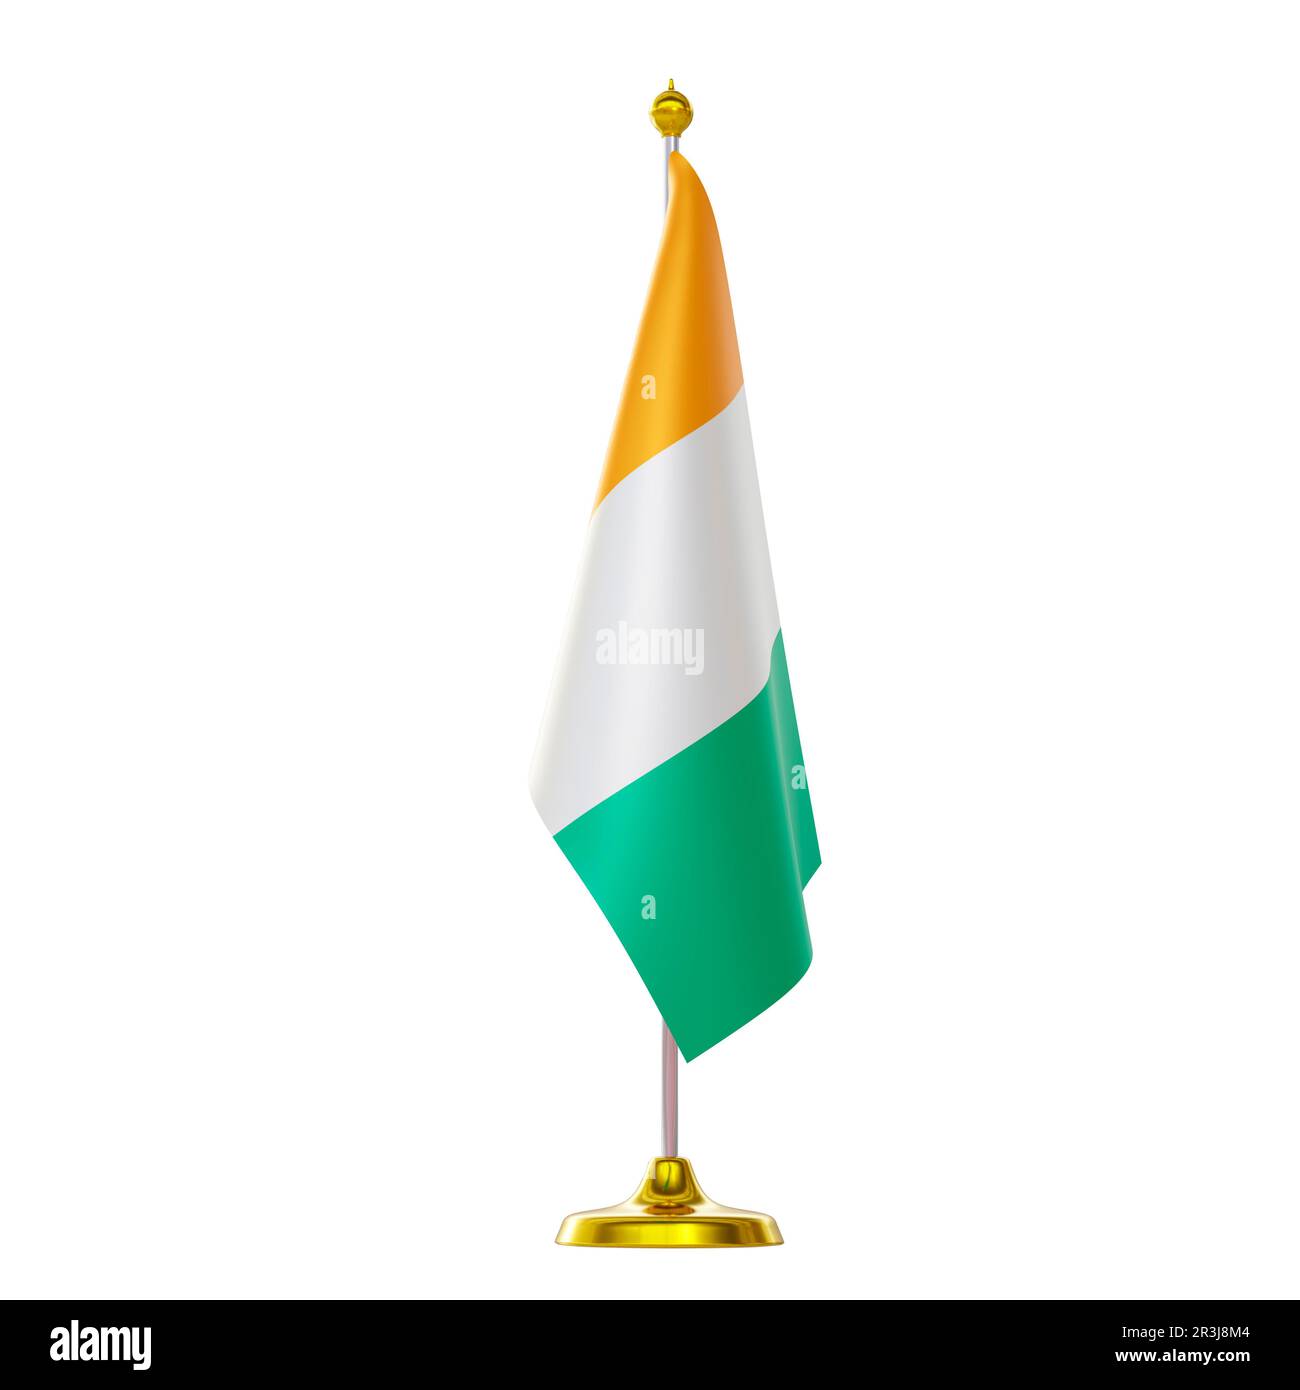 3d render of flag on pole for Ivory Coast or CÃ´te d'Ivoire countries summit and political meeting. Stock Photo